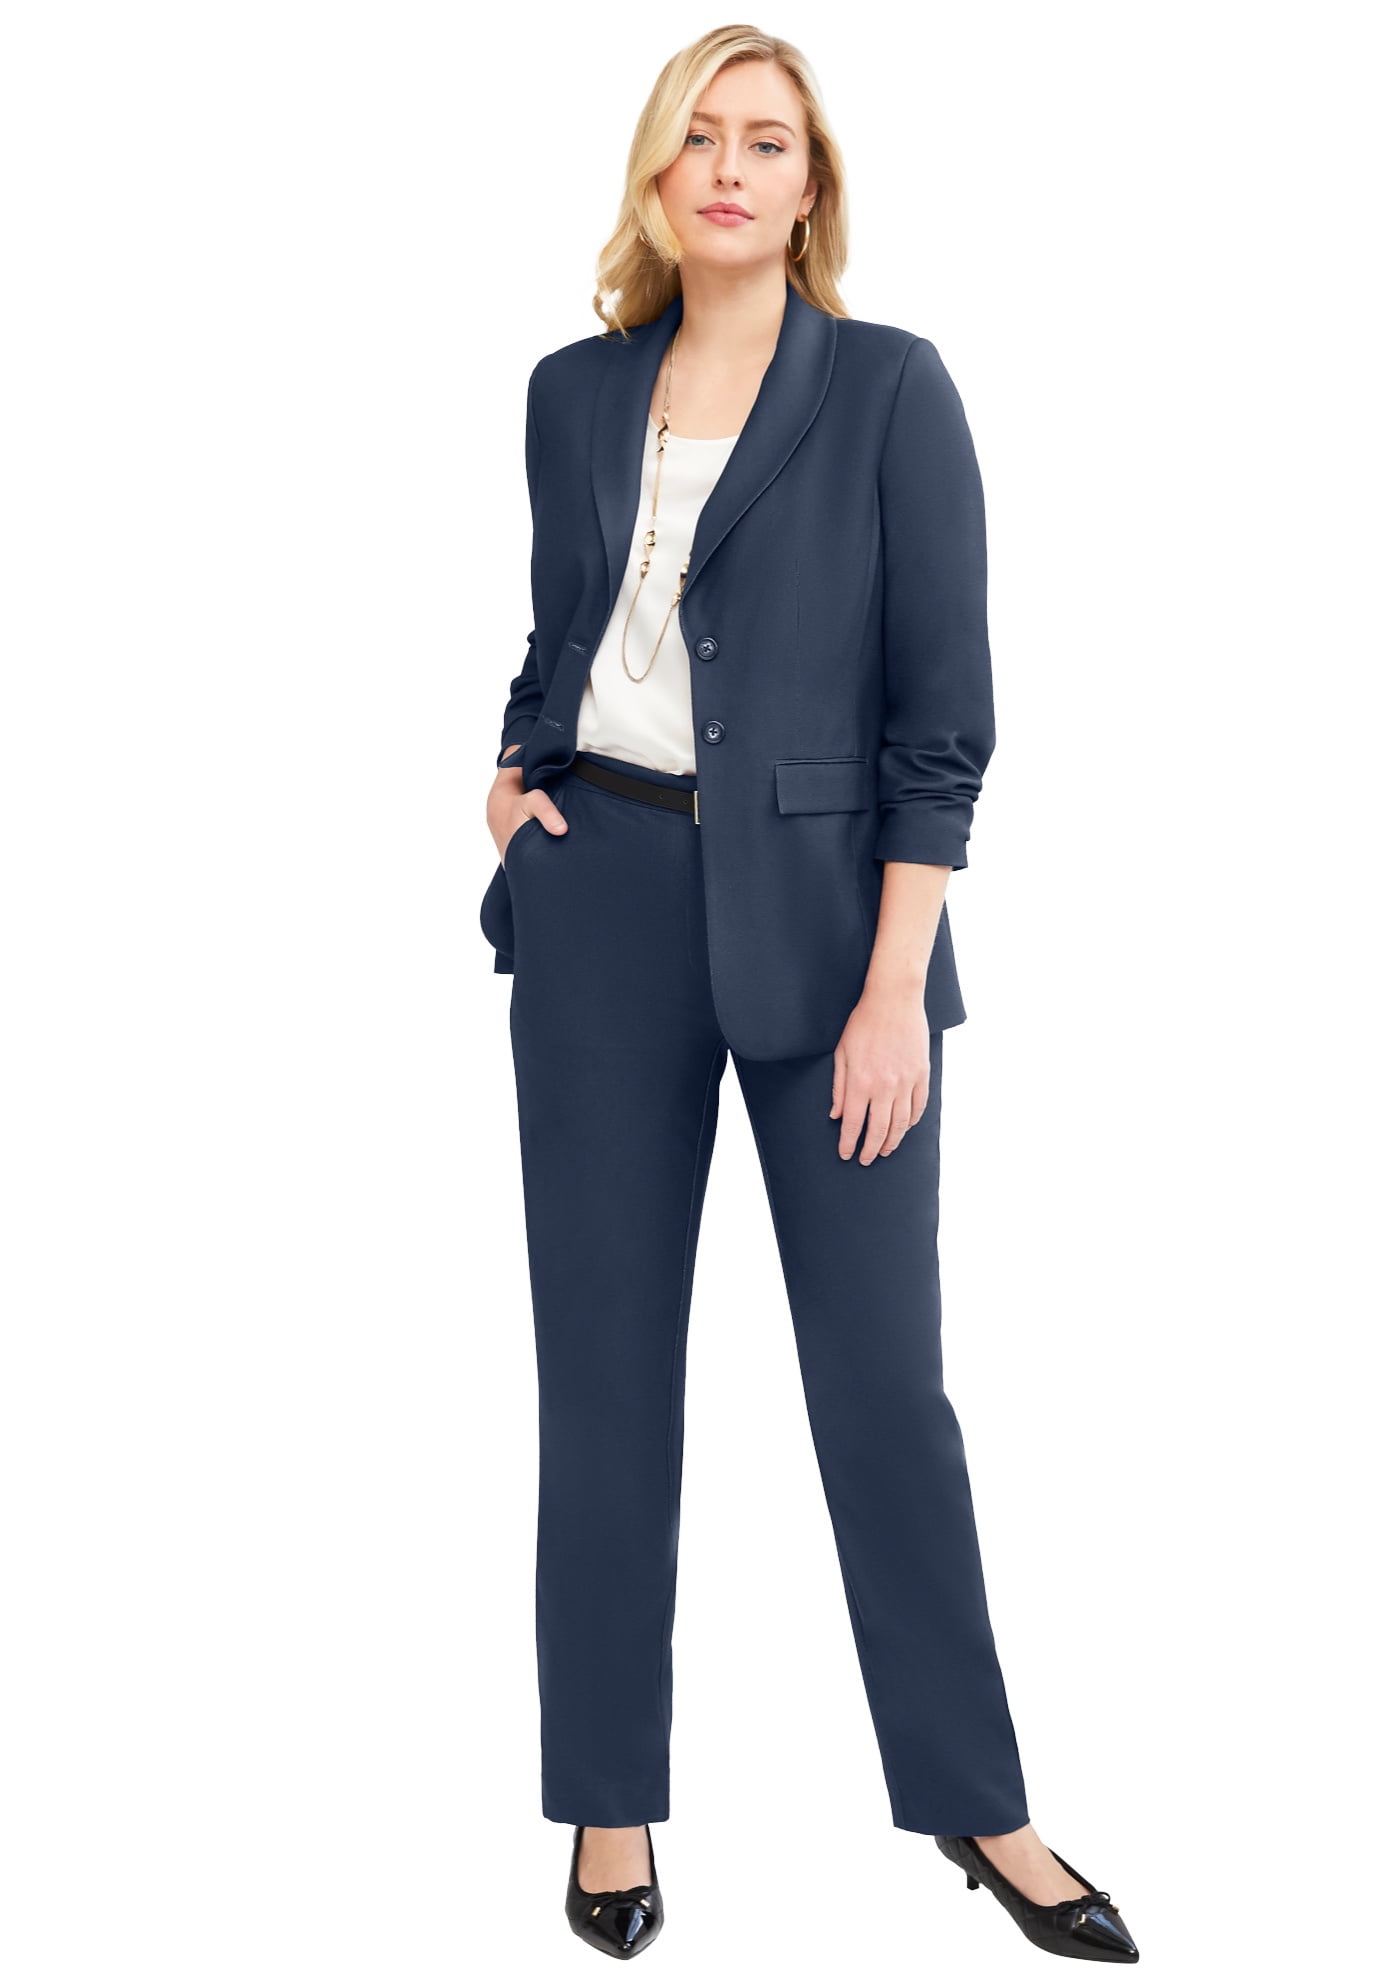 Jessica London Women's Plus Size Two Piece Single Breasted Pant Suit Set -  16 W, Navy Blue